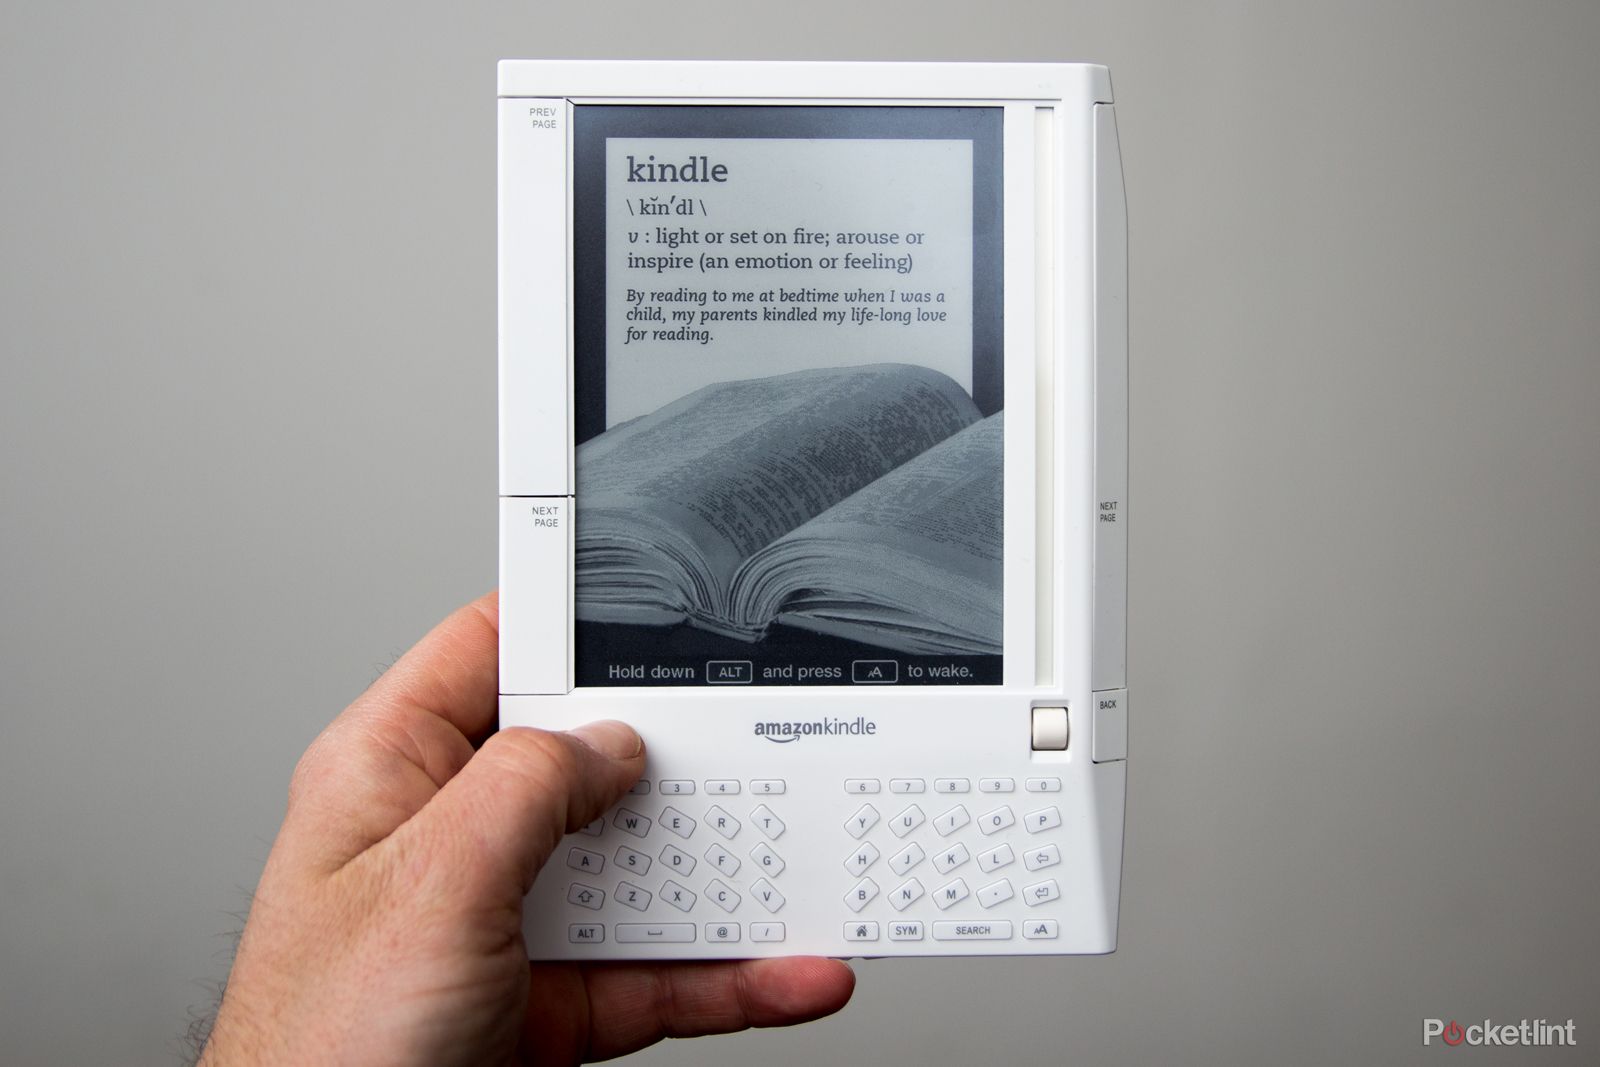 amazon kindle a brief history from the original kindle onwards image 2